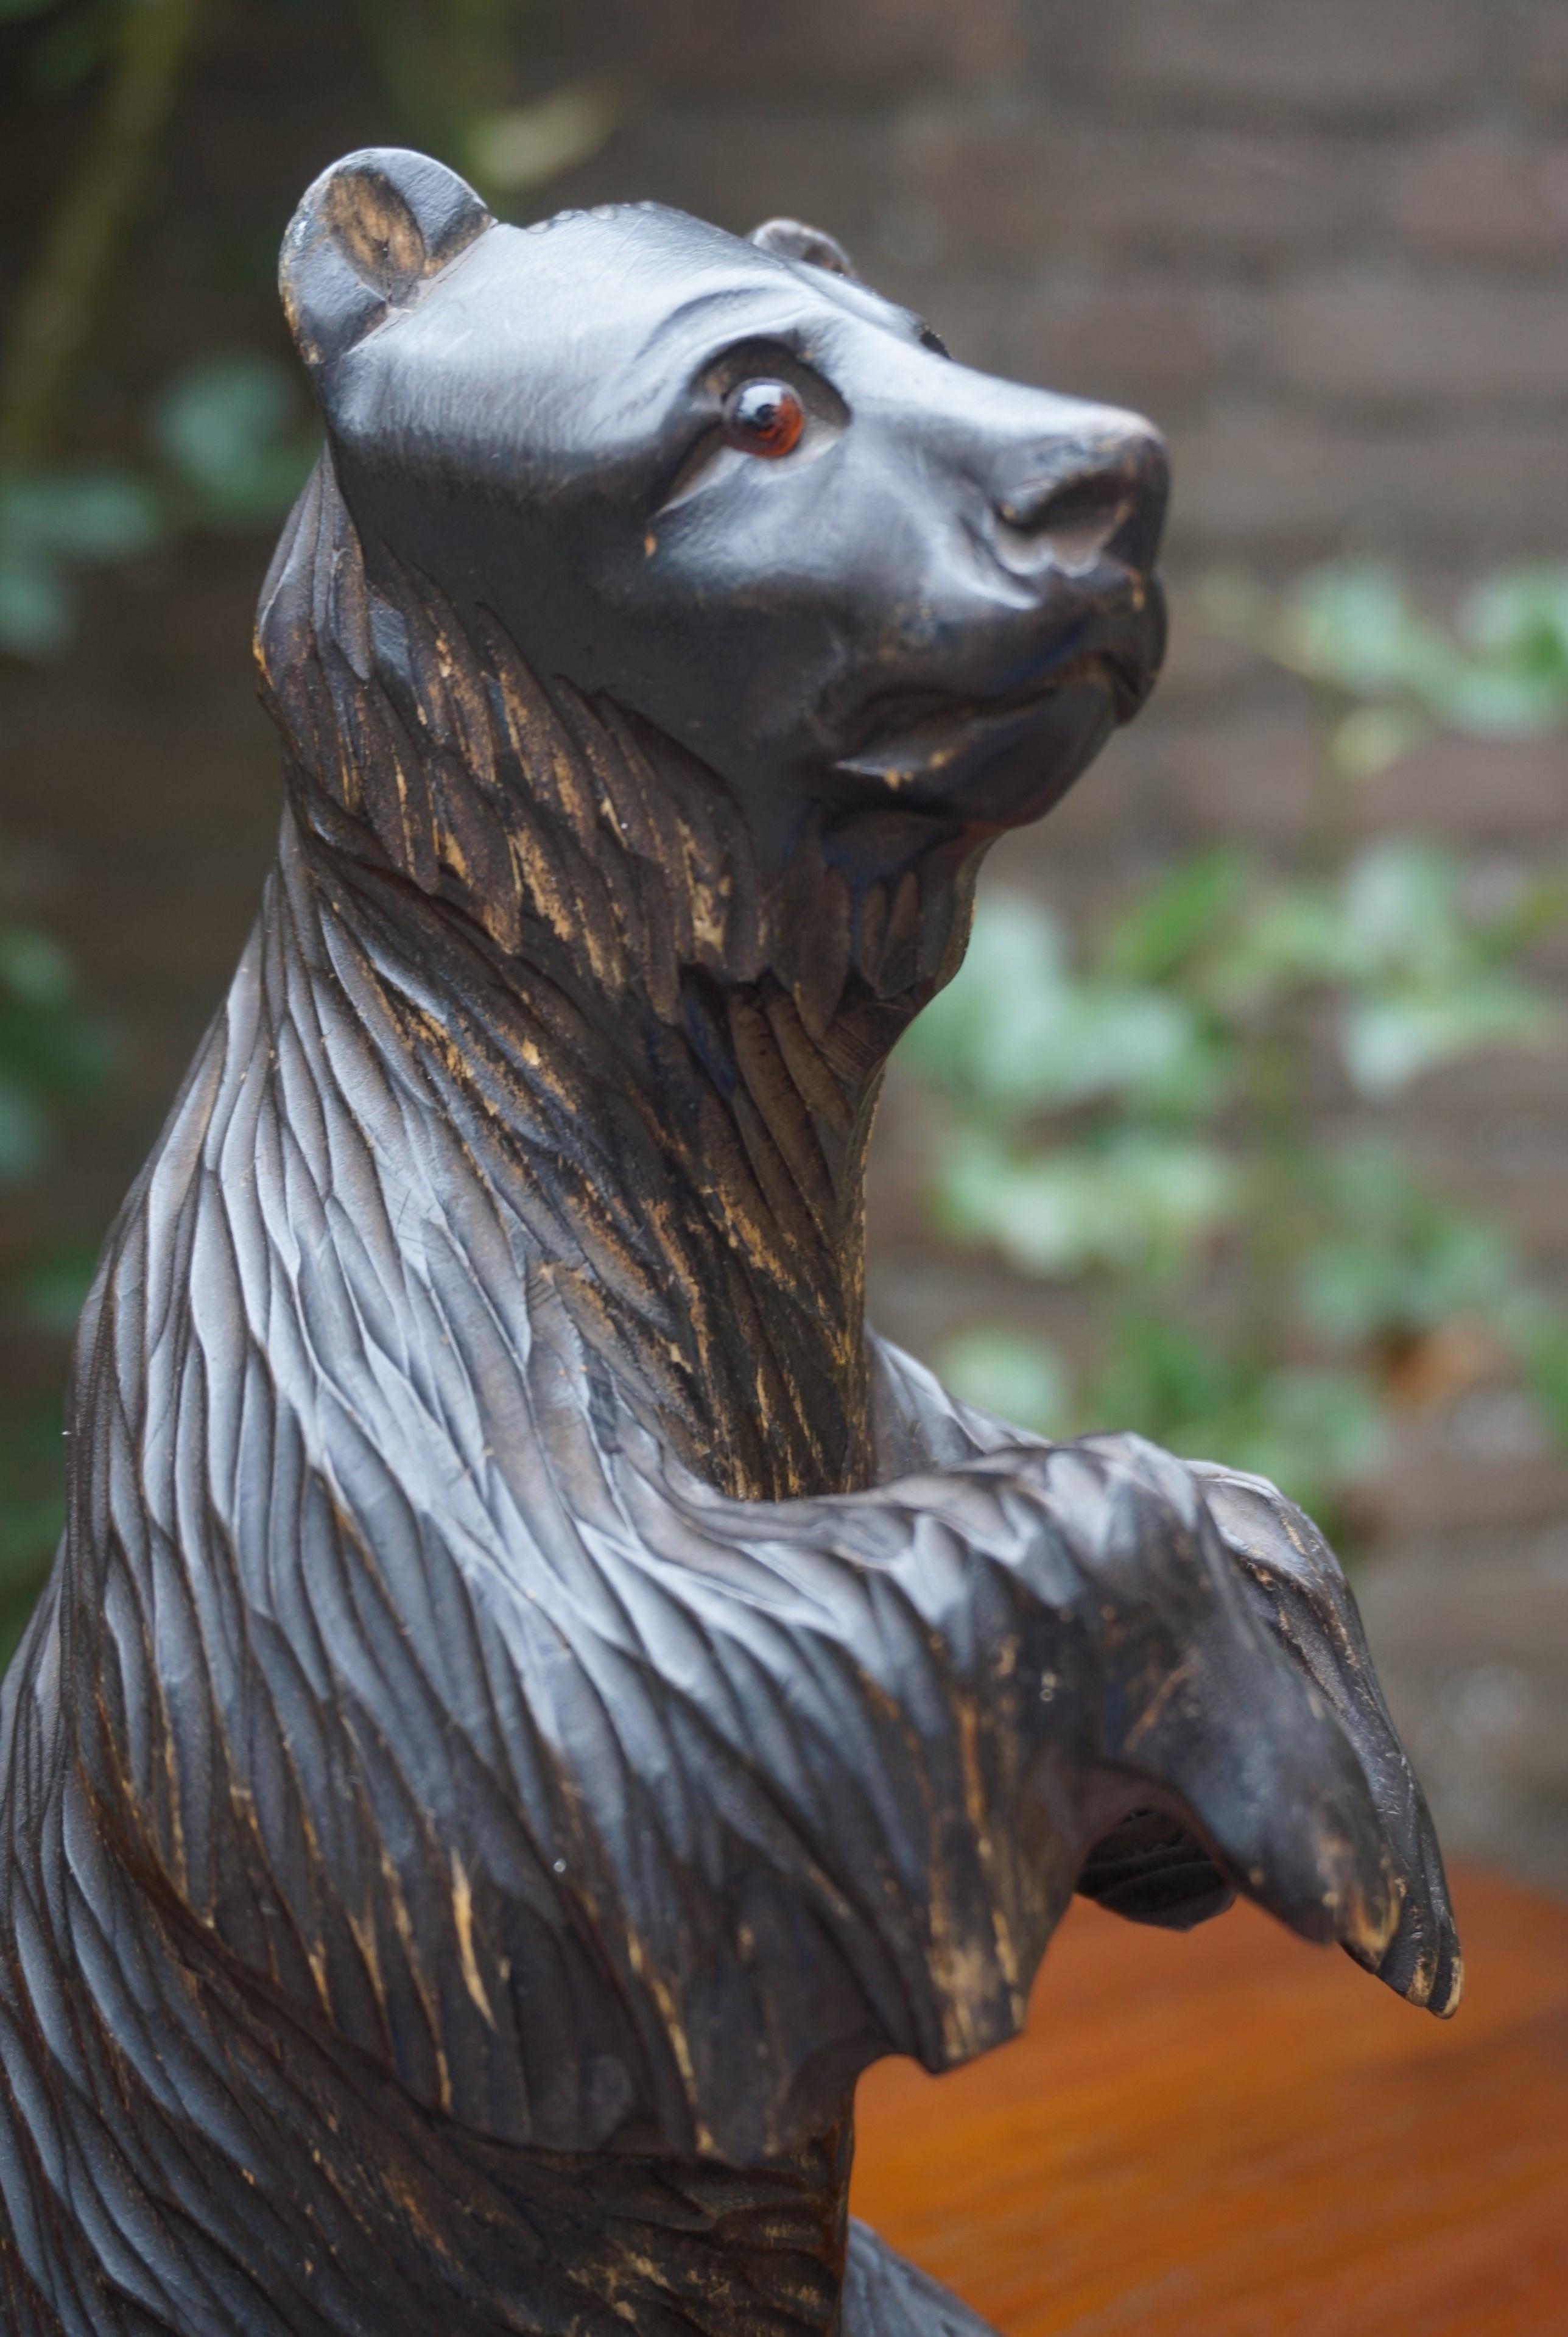 carved wooden bear